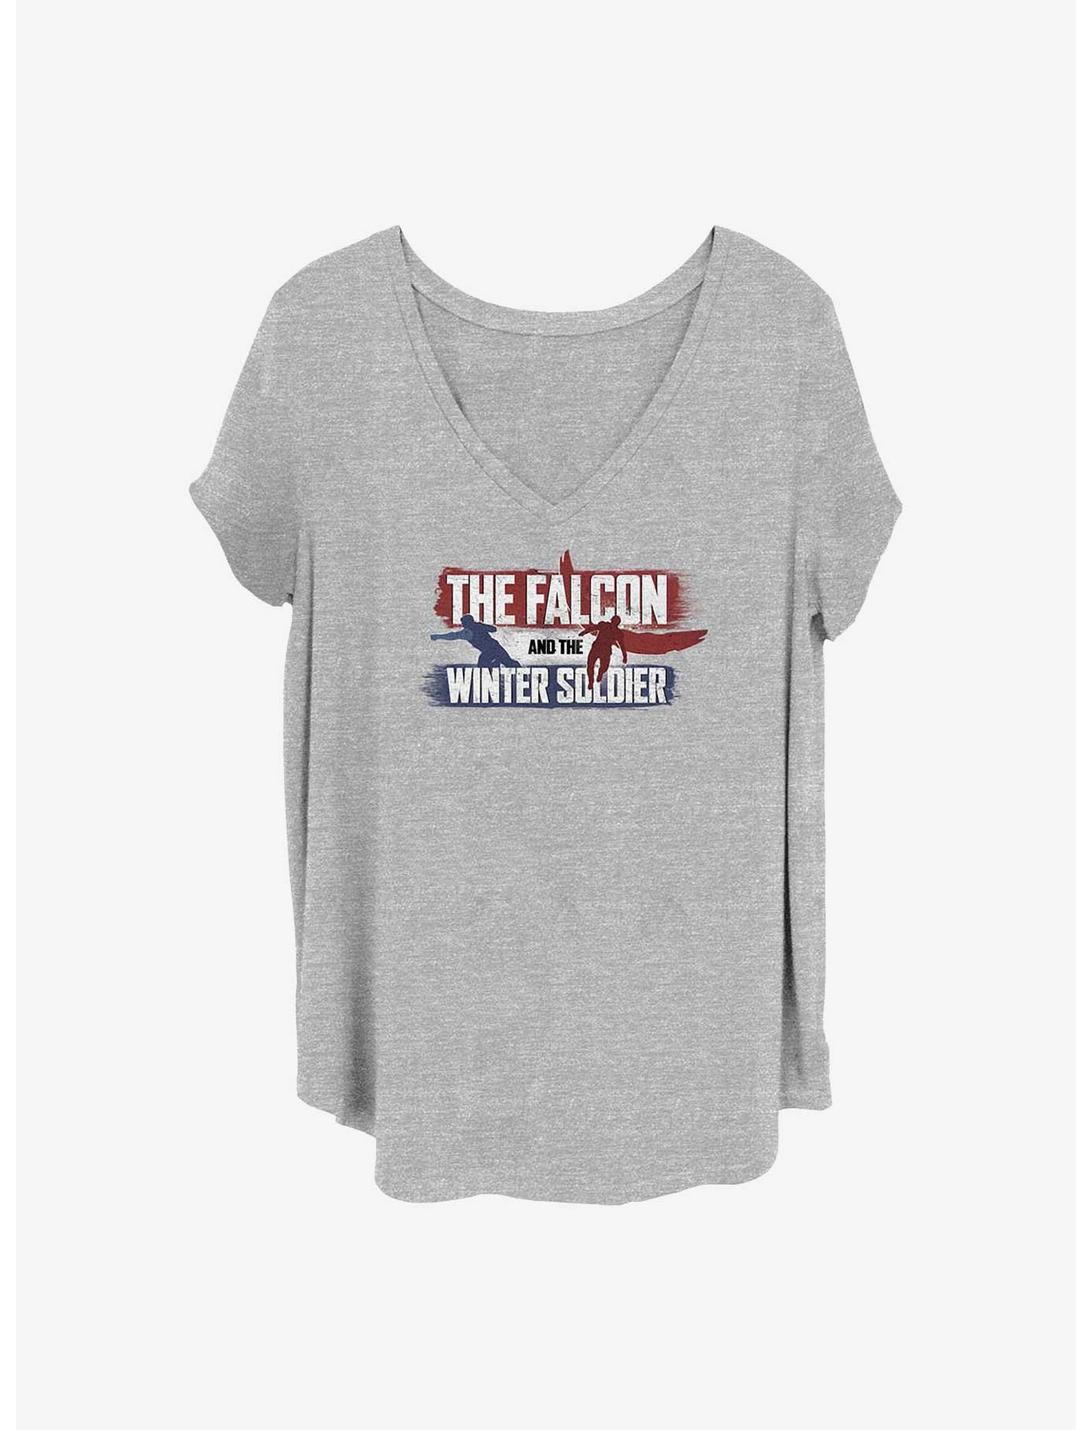 Marvel The Falcon and the Winter Soldier Spray Paint Girls T-Shirt Plus Size, HEATHER GR, hi-res